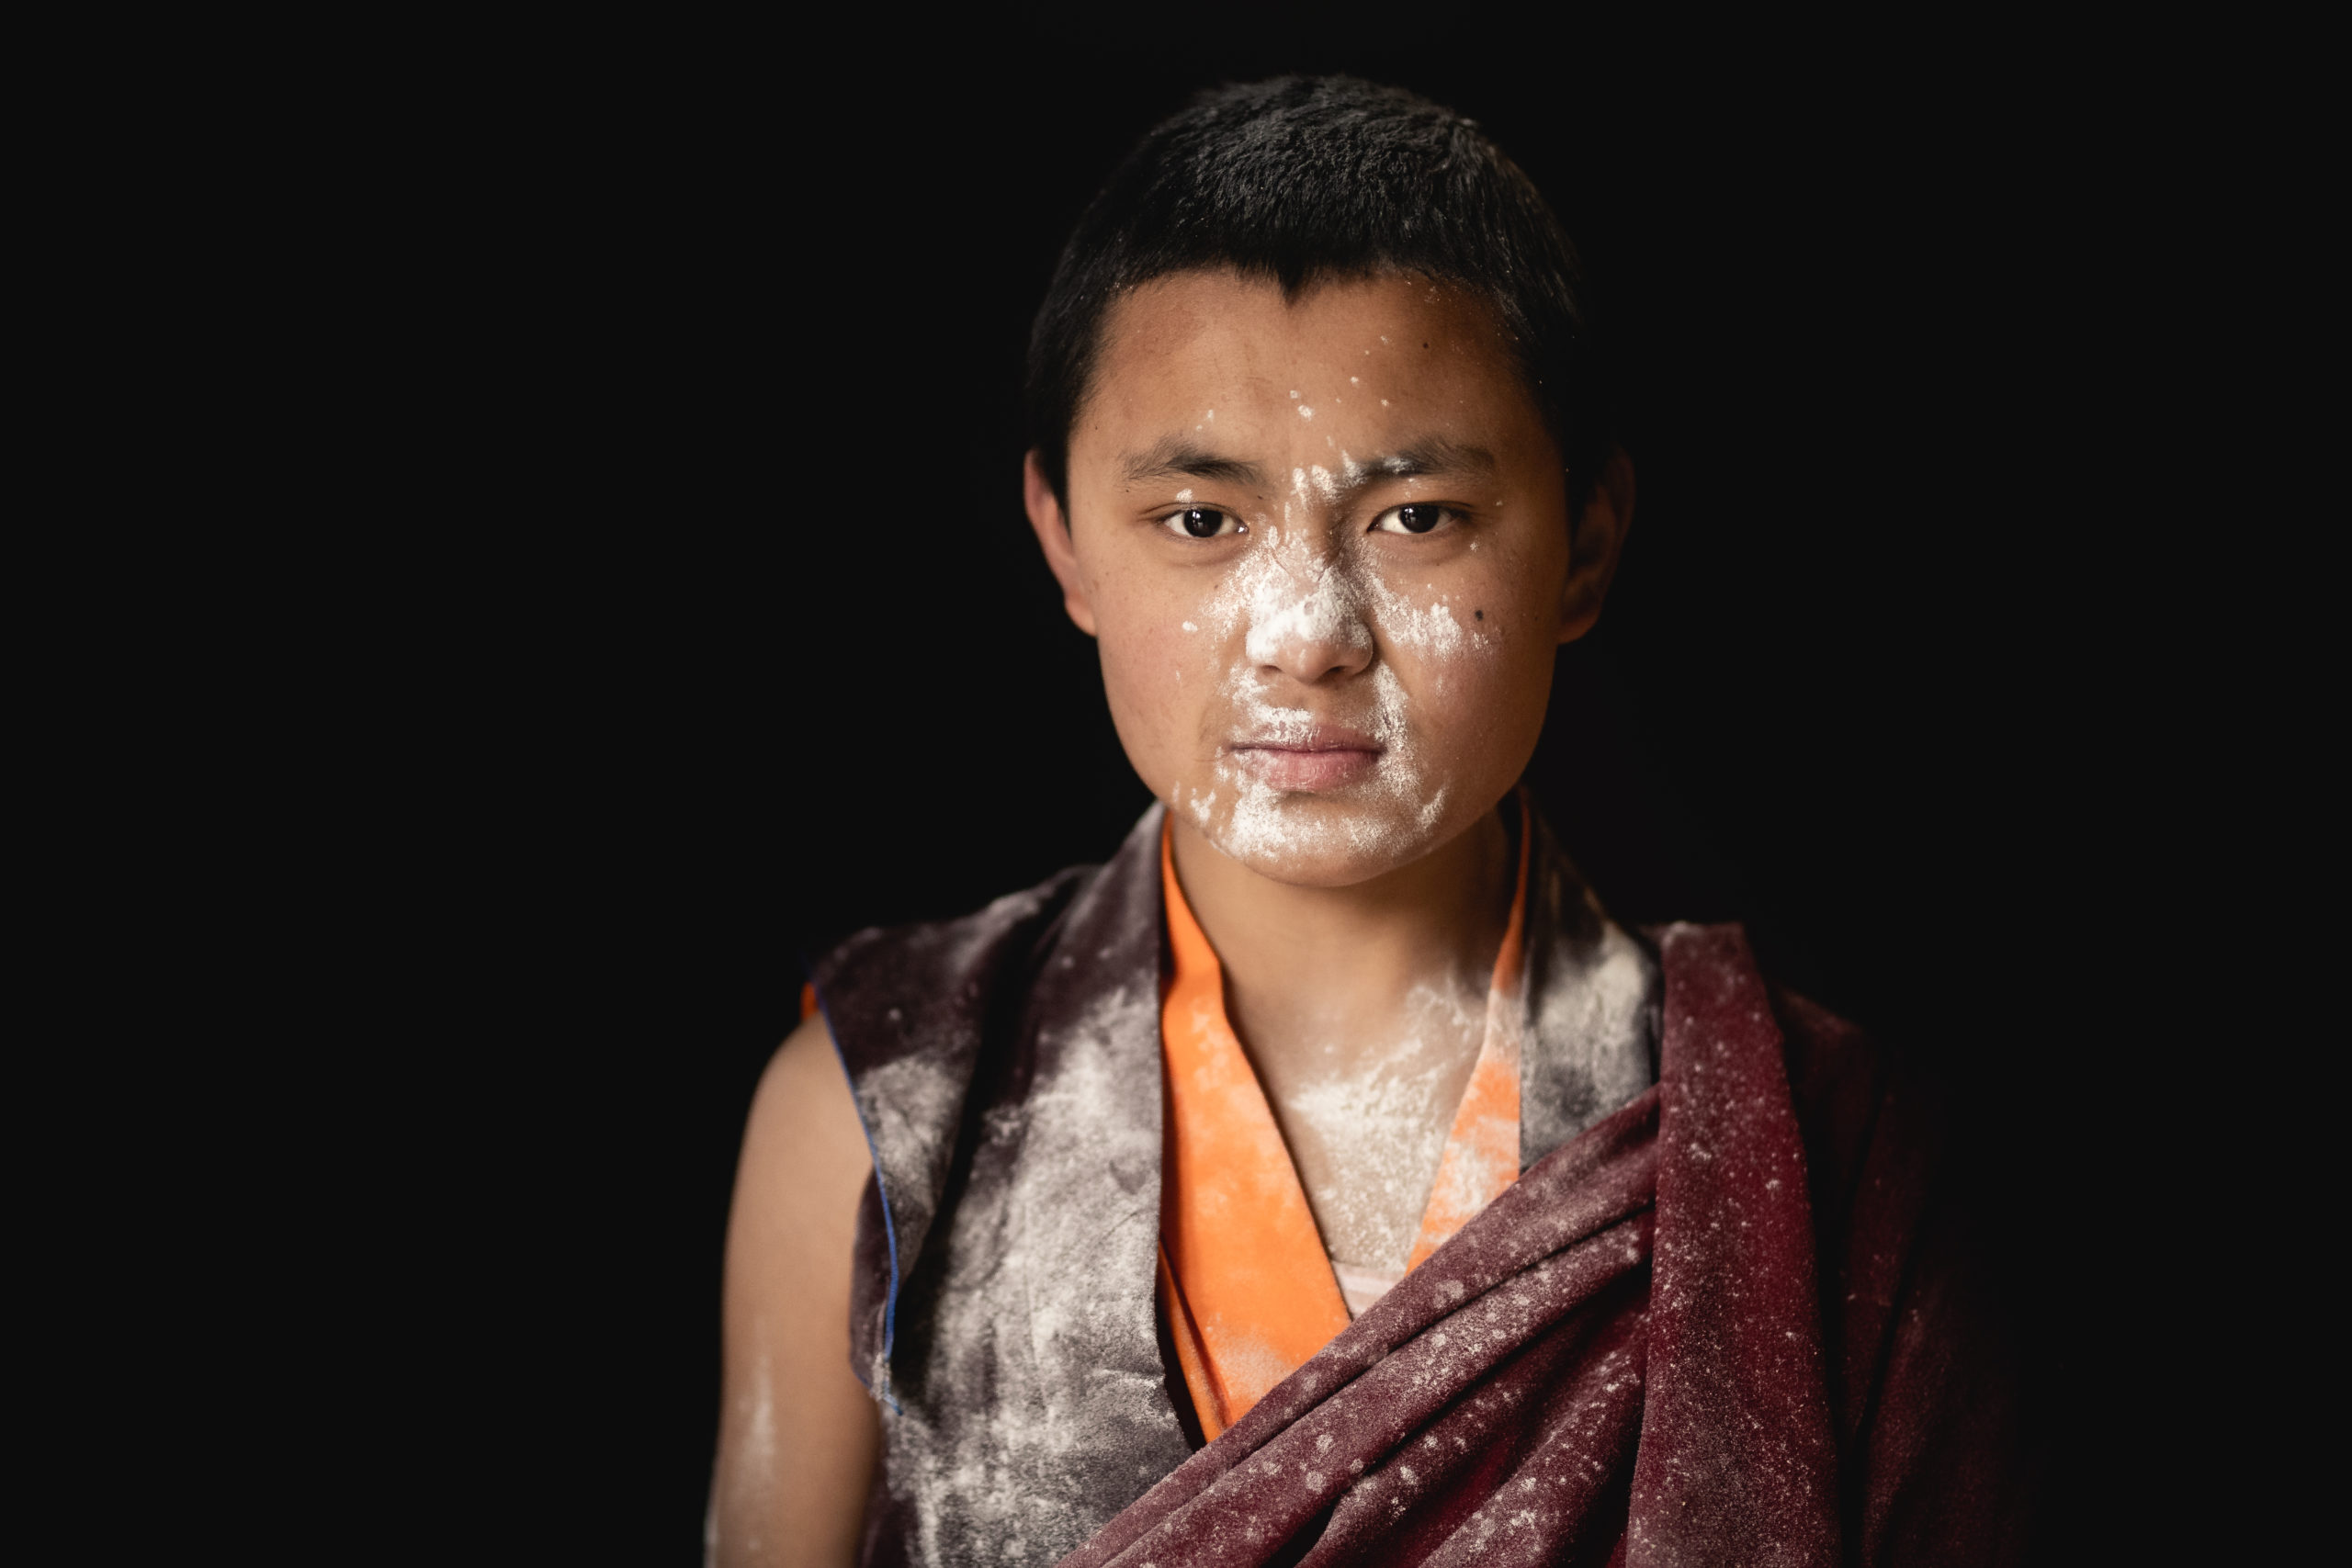 Portrait photography of a young monk in Bhutan with flour on his face and robes from the Losar Festival